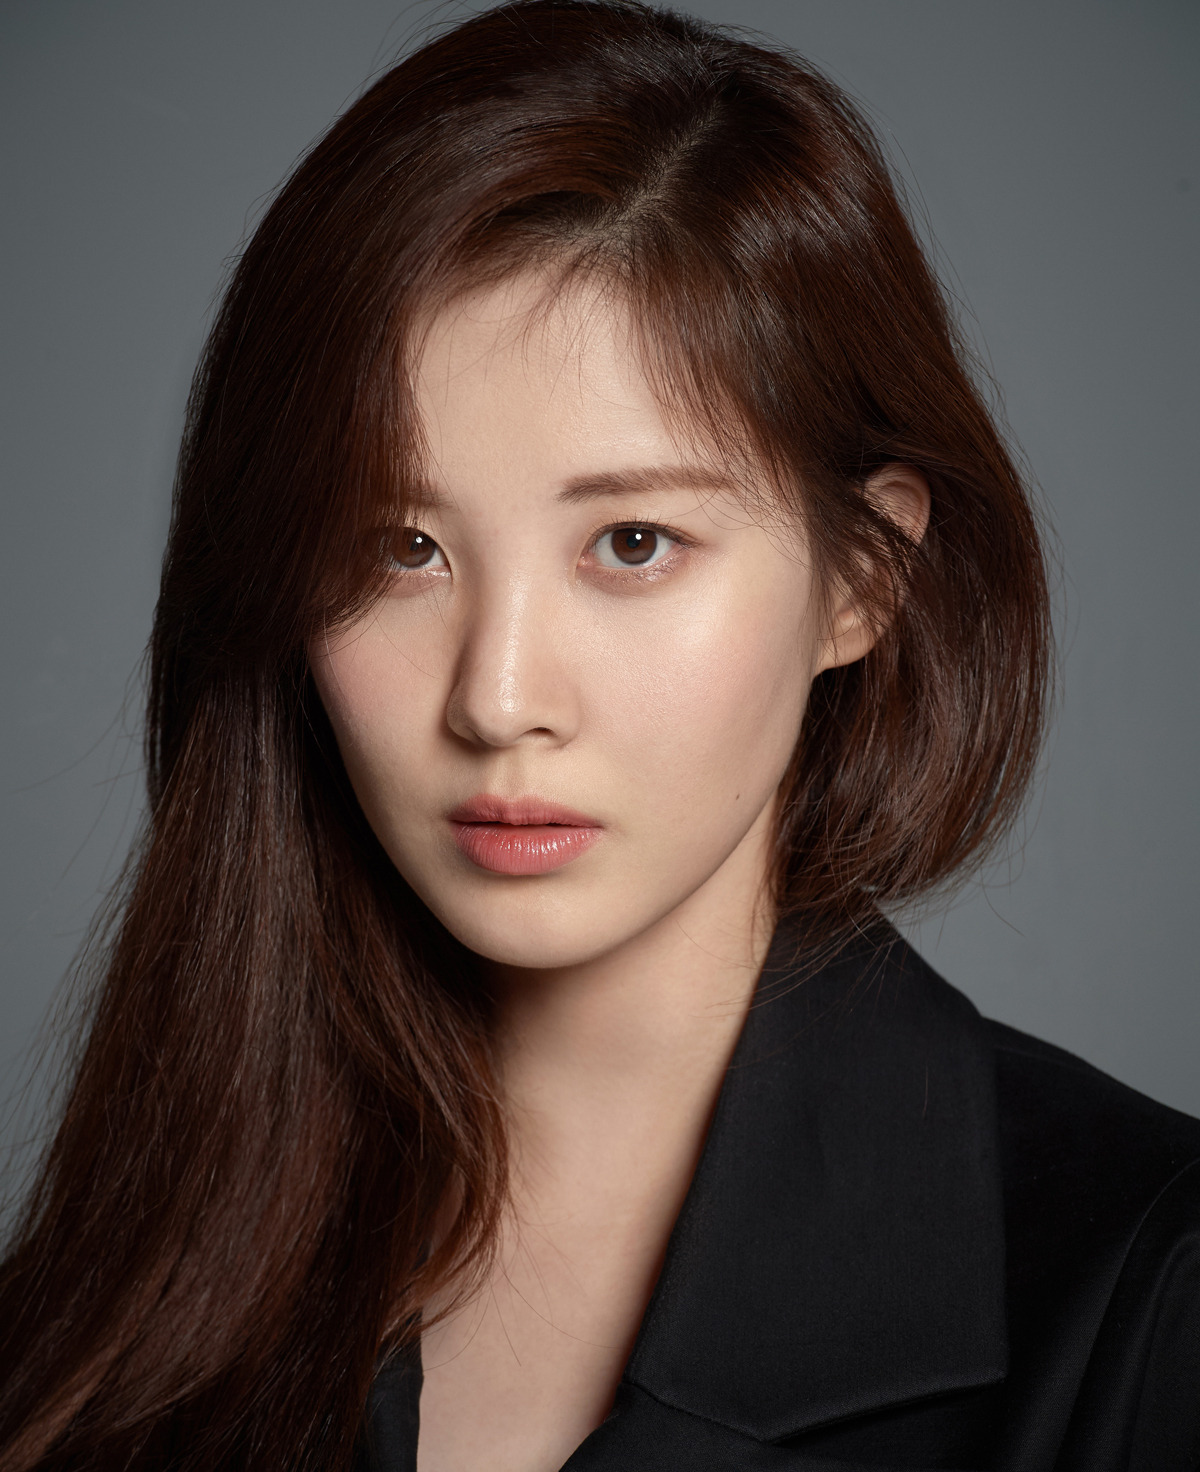 Seoul) = A new profile photo of actor Seohyun has been released.Seahouns agency, Namoo Actors, released a new profile photo of Seahoun on its official website on the afternoon of the 3rd.In the photo, Seohyun captivates his gaze with charisma and innocence.He wears a suit and emits charisma with a tough look, and he catches the eye with a pure atmosphere with a white shirt and jeans.Growing from girl to GLOW, the new look of matured Seohyun makes you look forward to the future more.Meanwhile, Seohyun signed an exclusive contract with Namoo Actors to signal full-fledged activity as an actor; he is currently reviewing his next film.